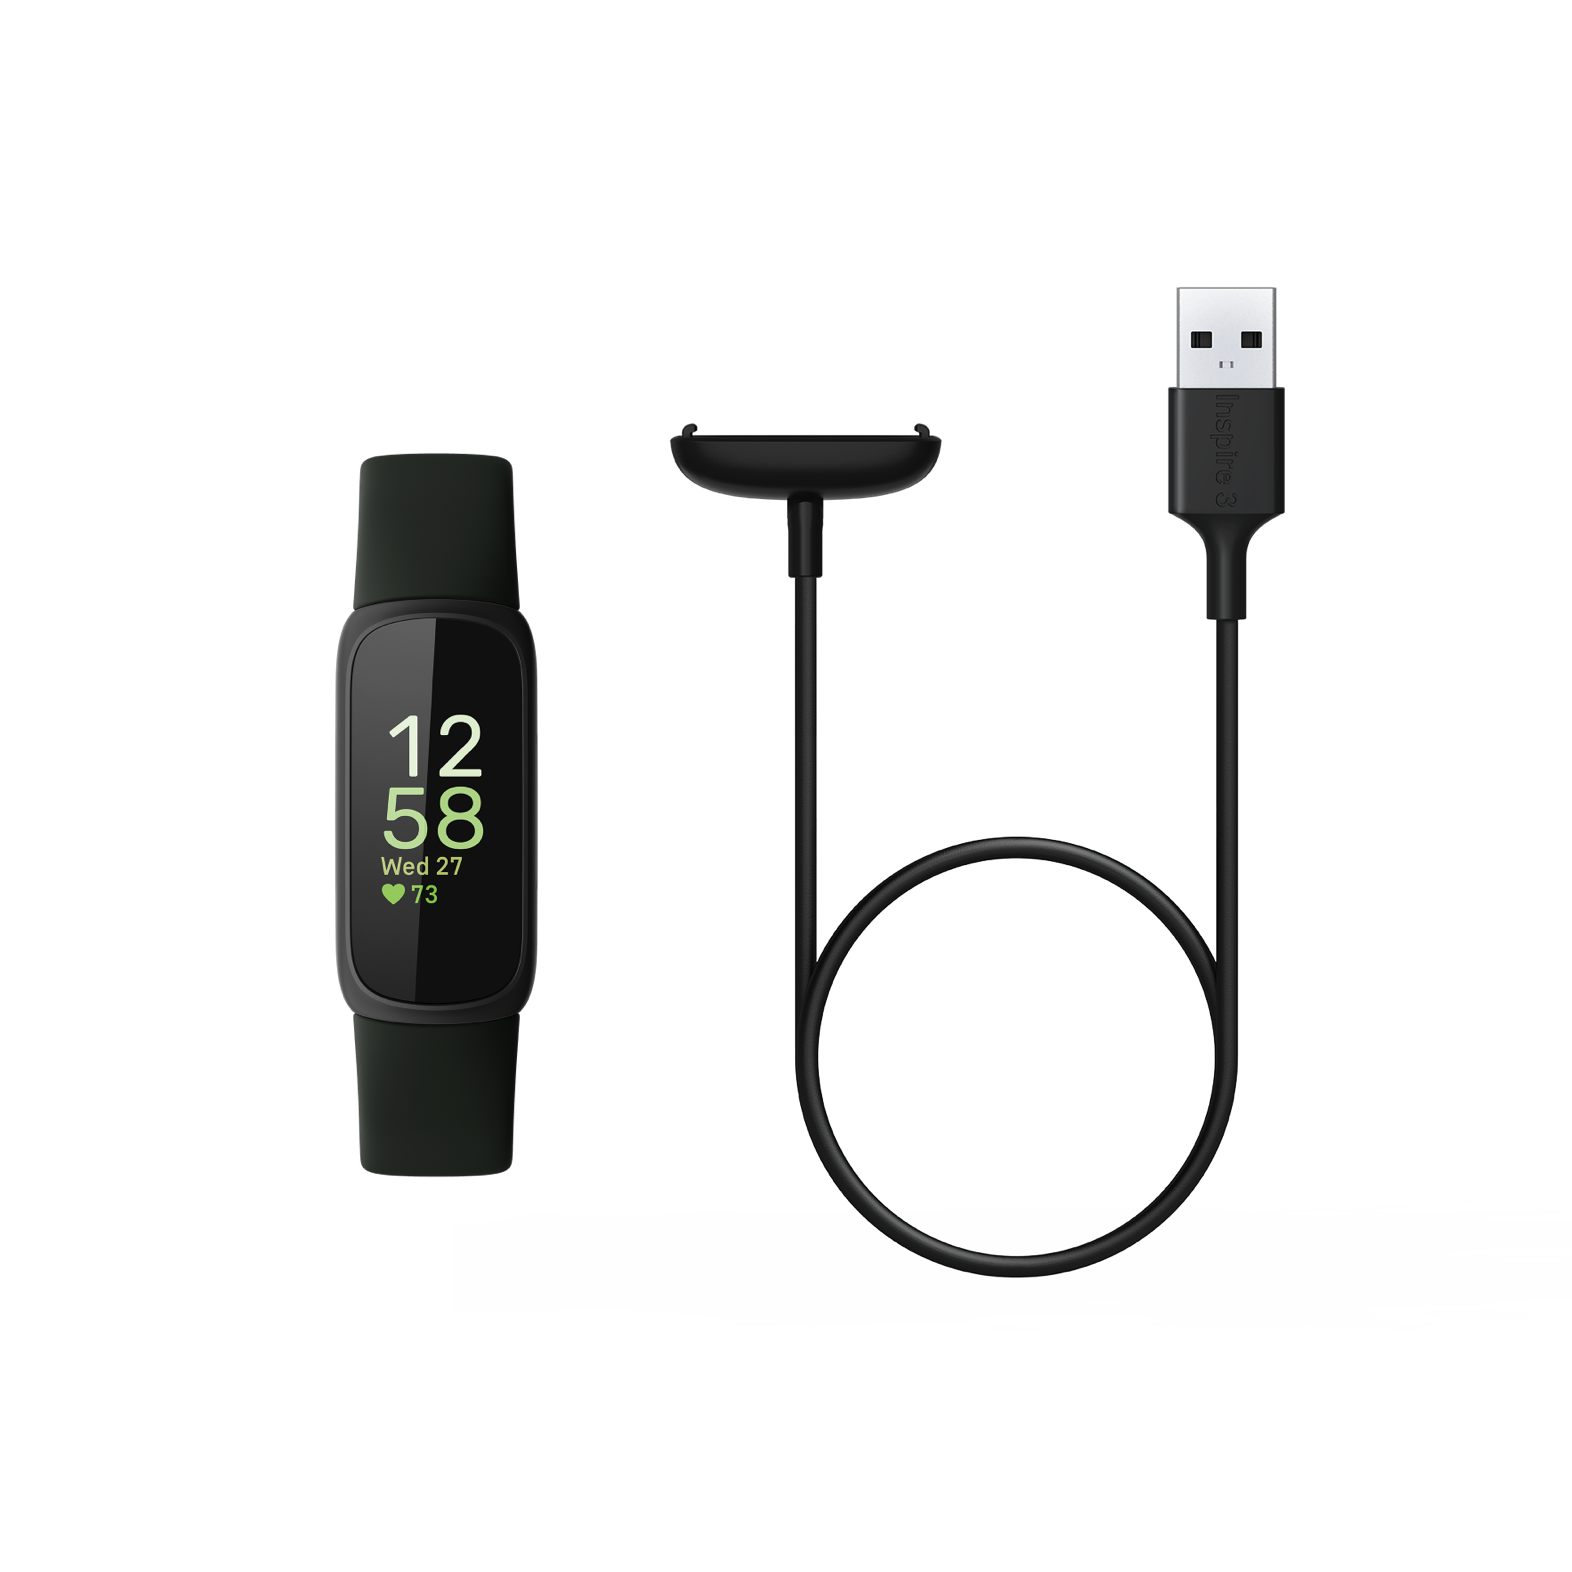 Charging Cable | Shop Inspire 3 Accessories